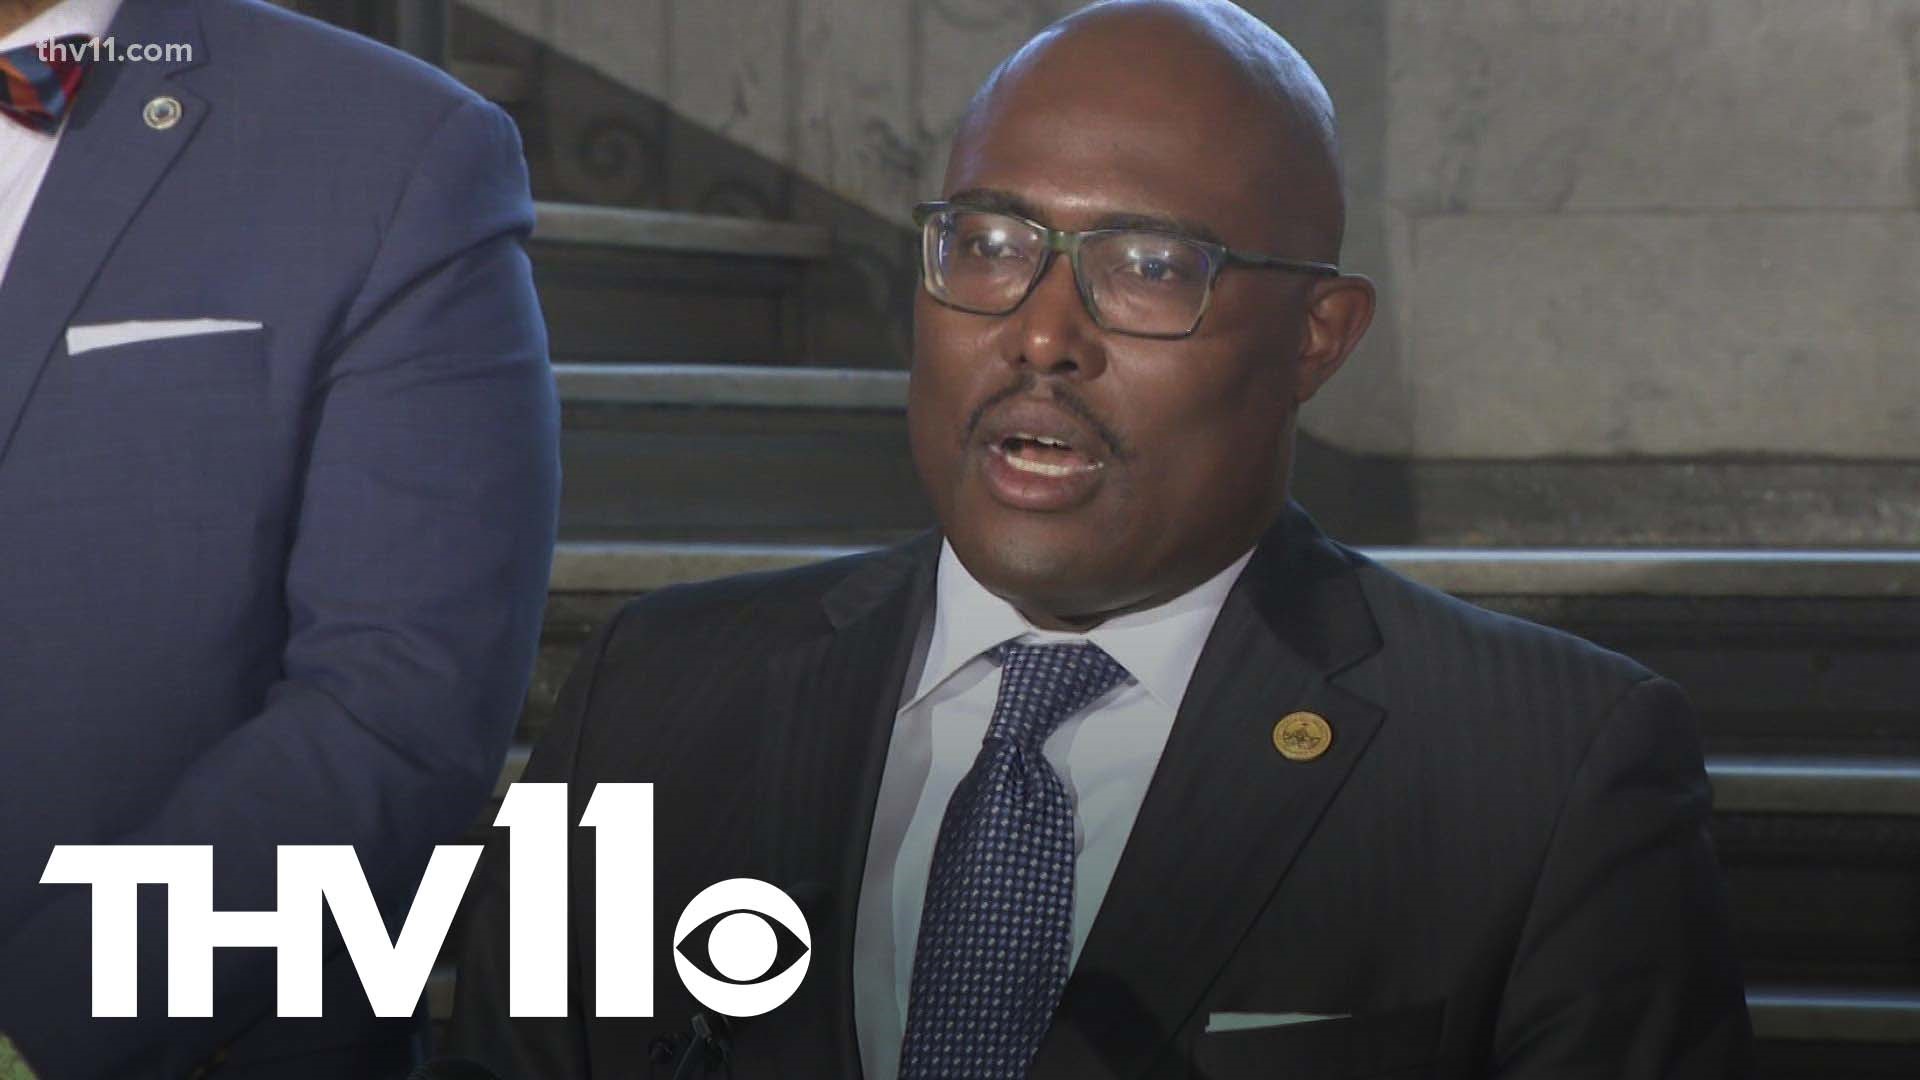 Little Rock Mayor Frank Scott, Jr., along with other city officials, shared an update on efforts to reduce the recent surge in crime.